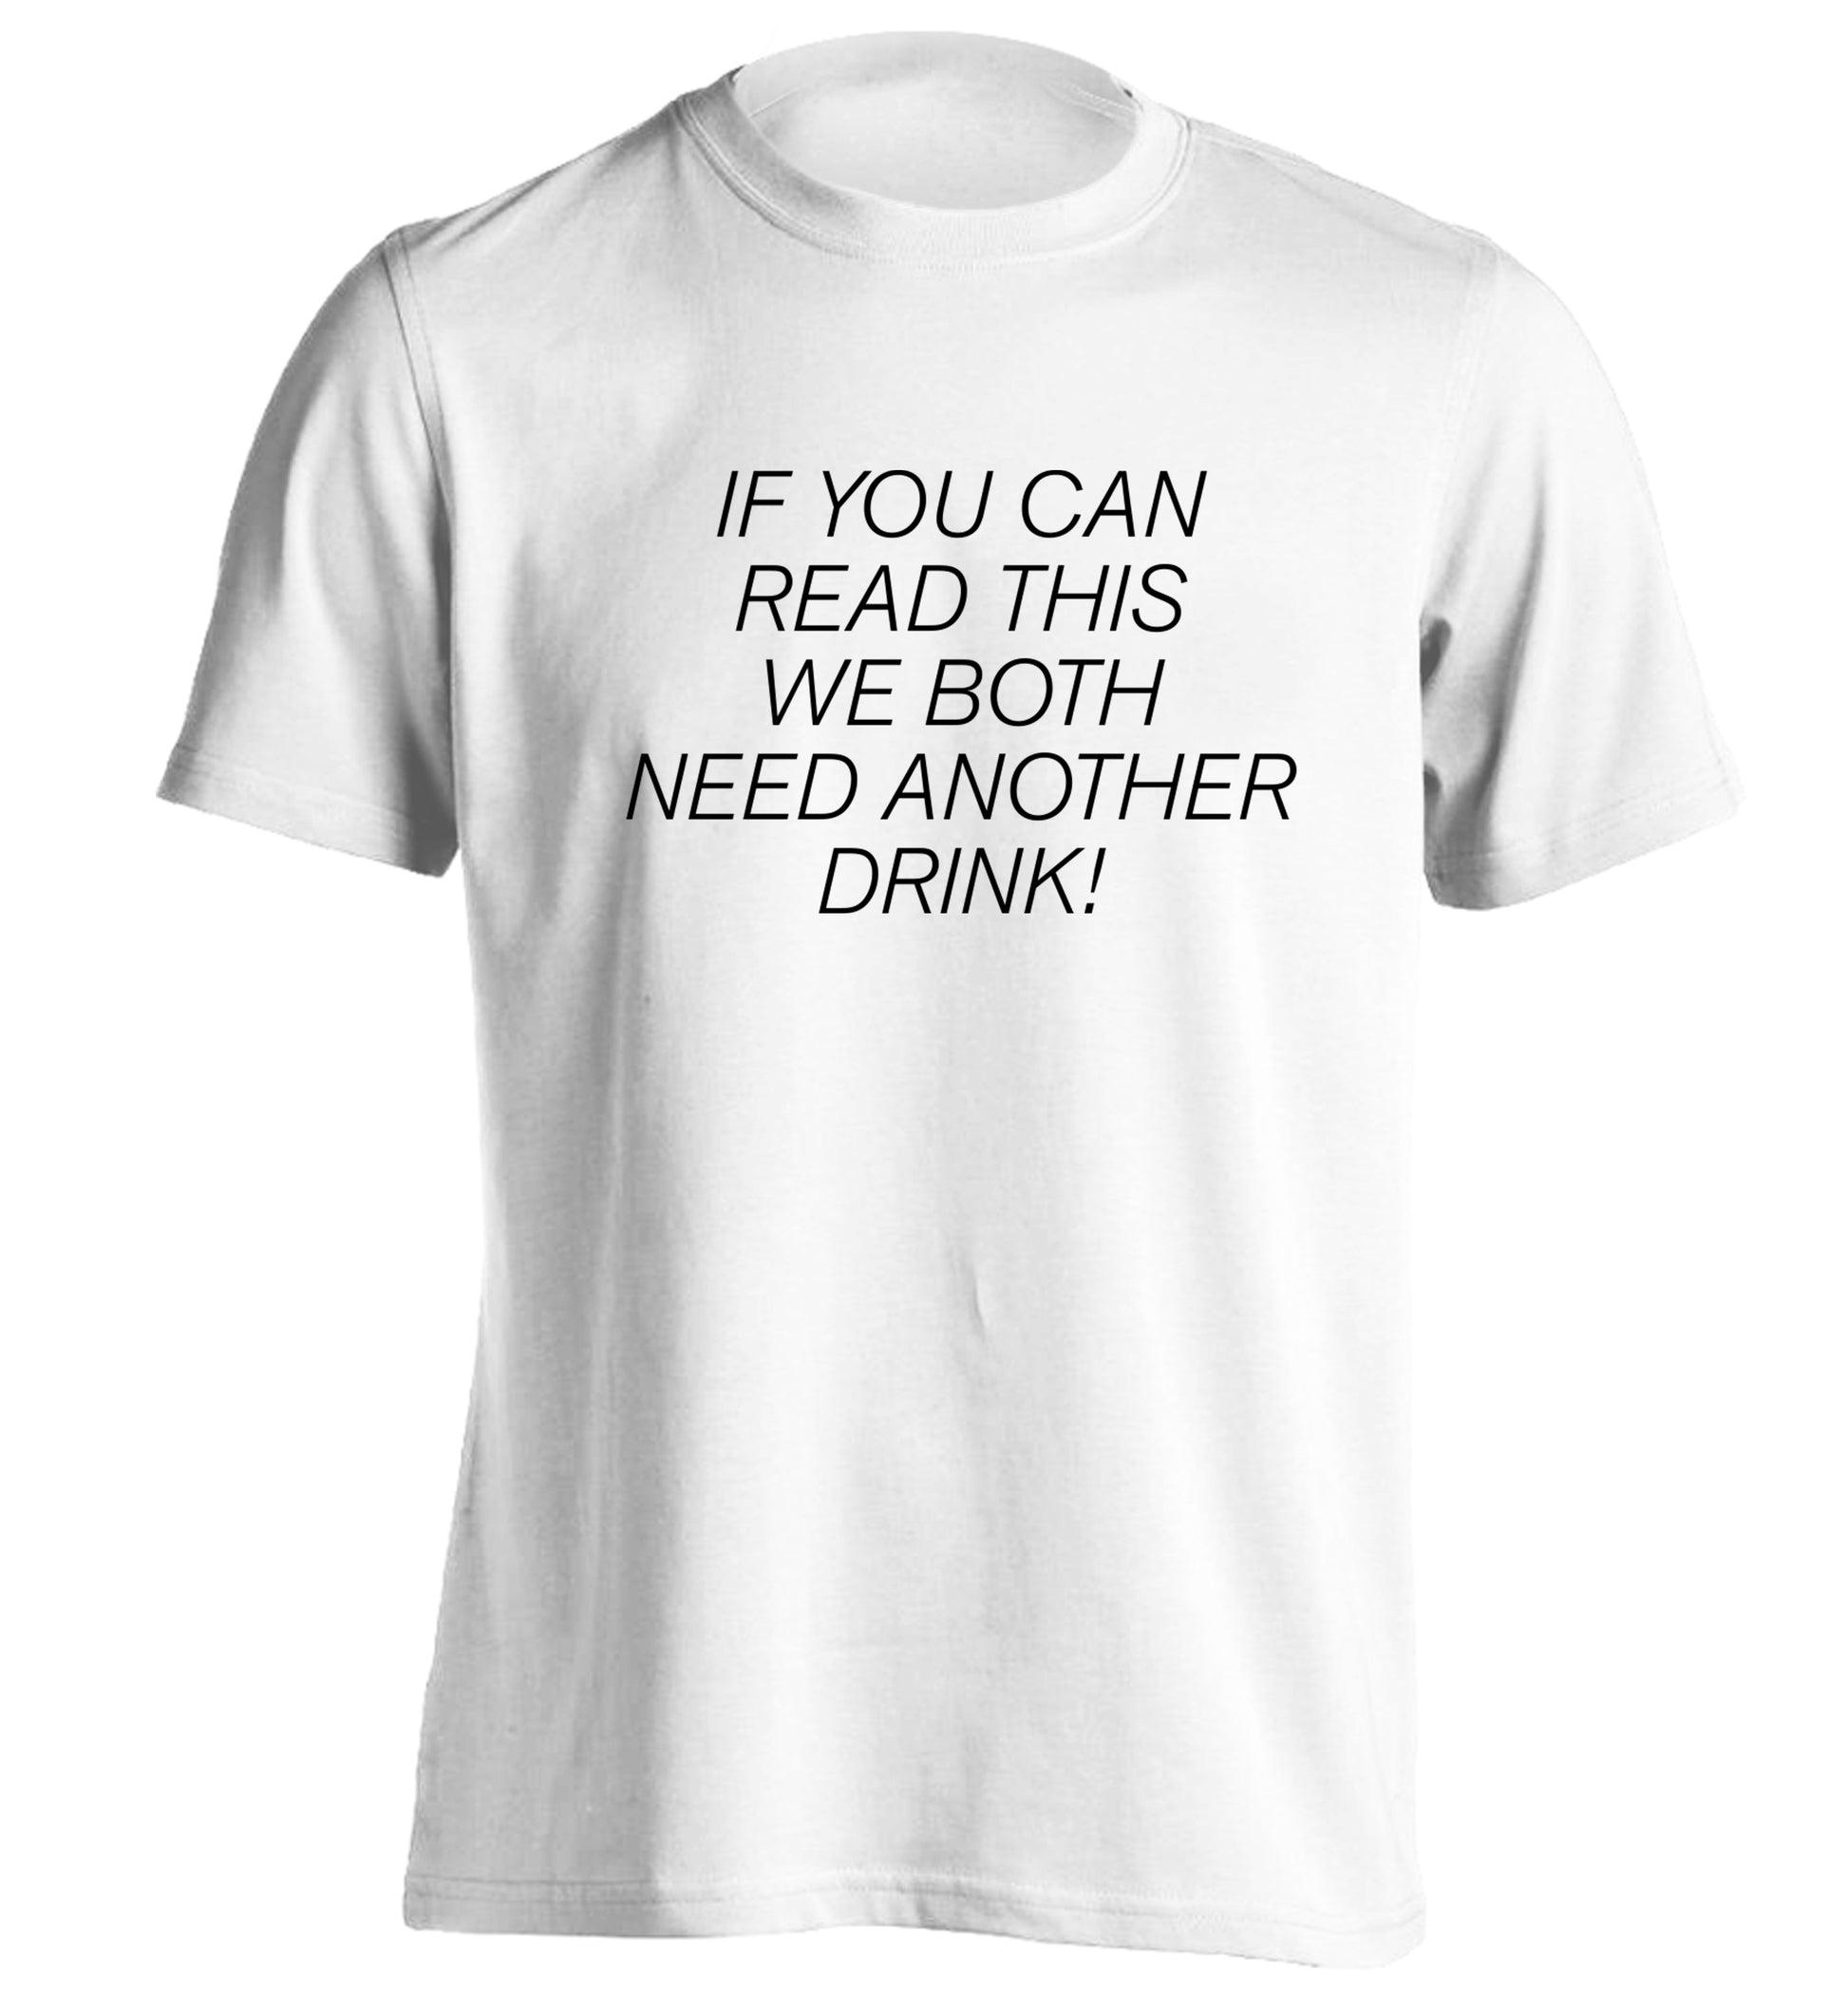 If you can read this we both need another drink! adults unisex white Tshirt 2XL